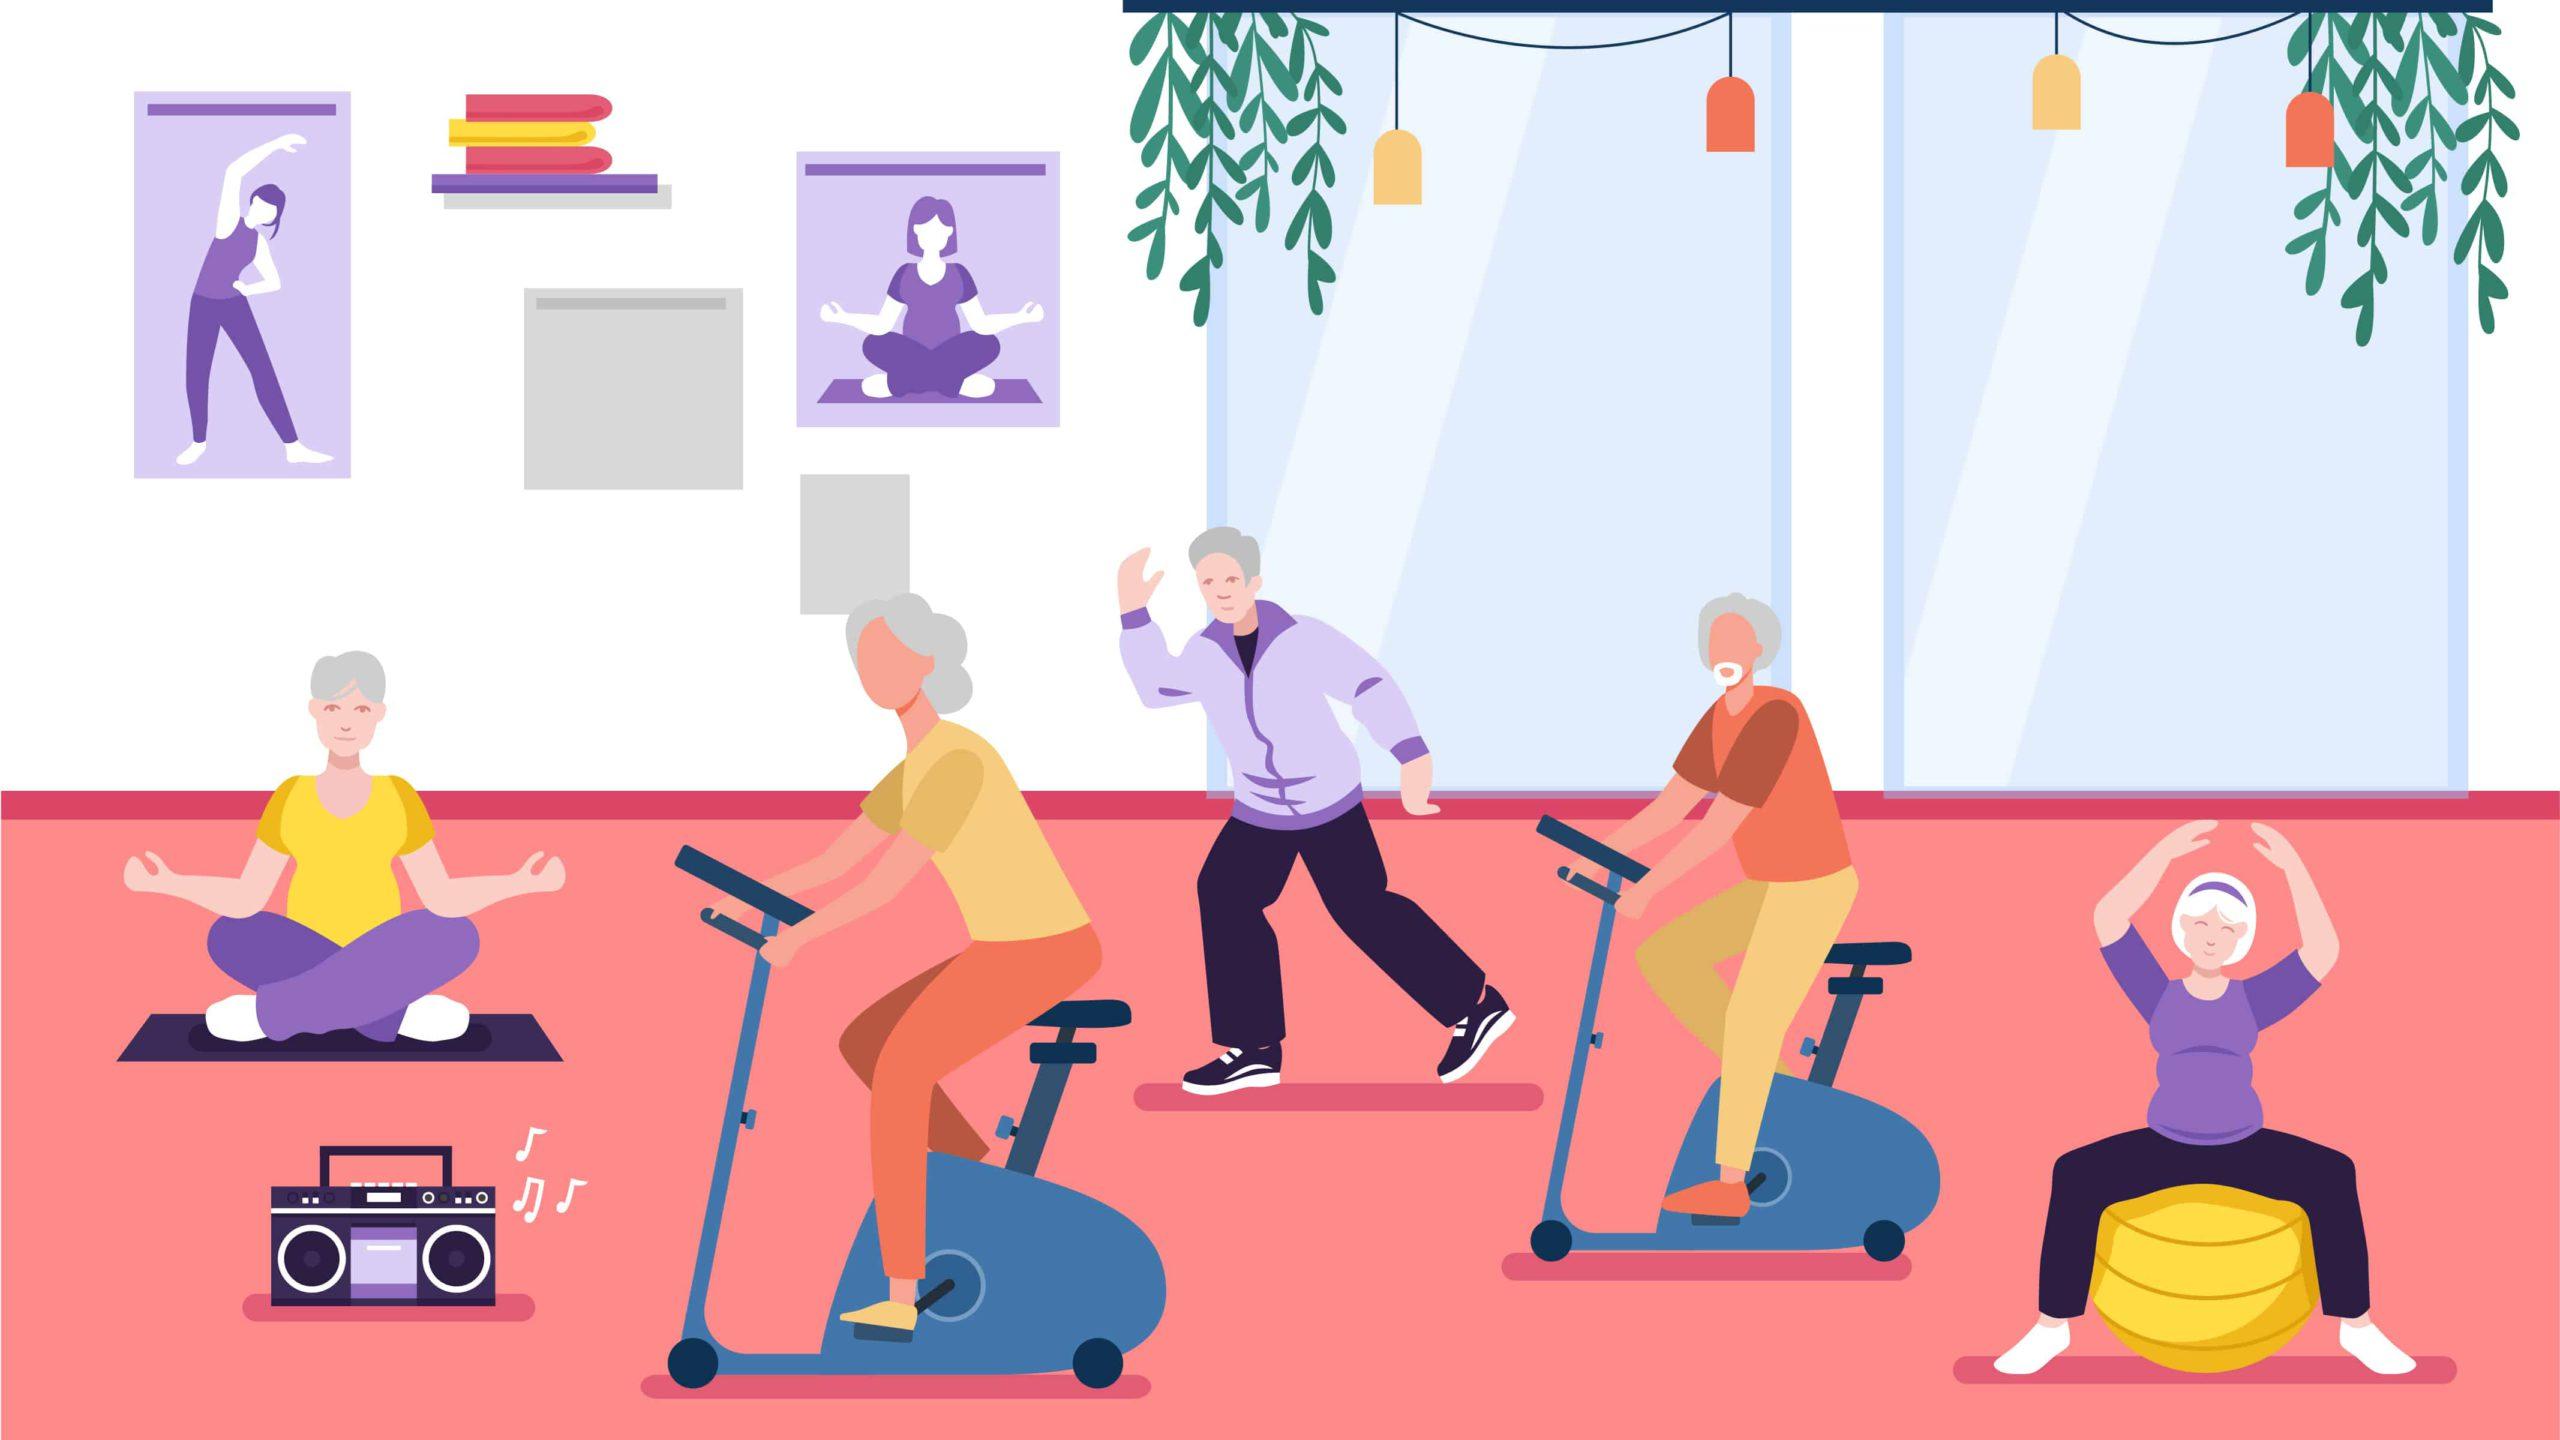 Chair Exercises for Seniors: 4 Moves to Improve Balance - SilverSneakers